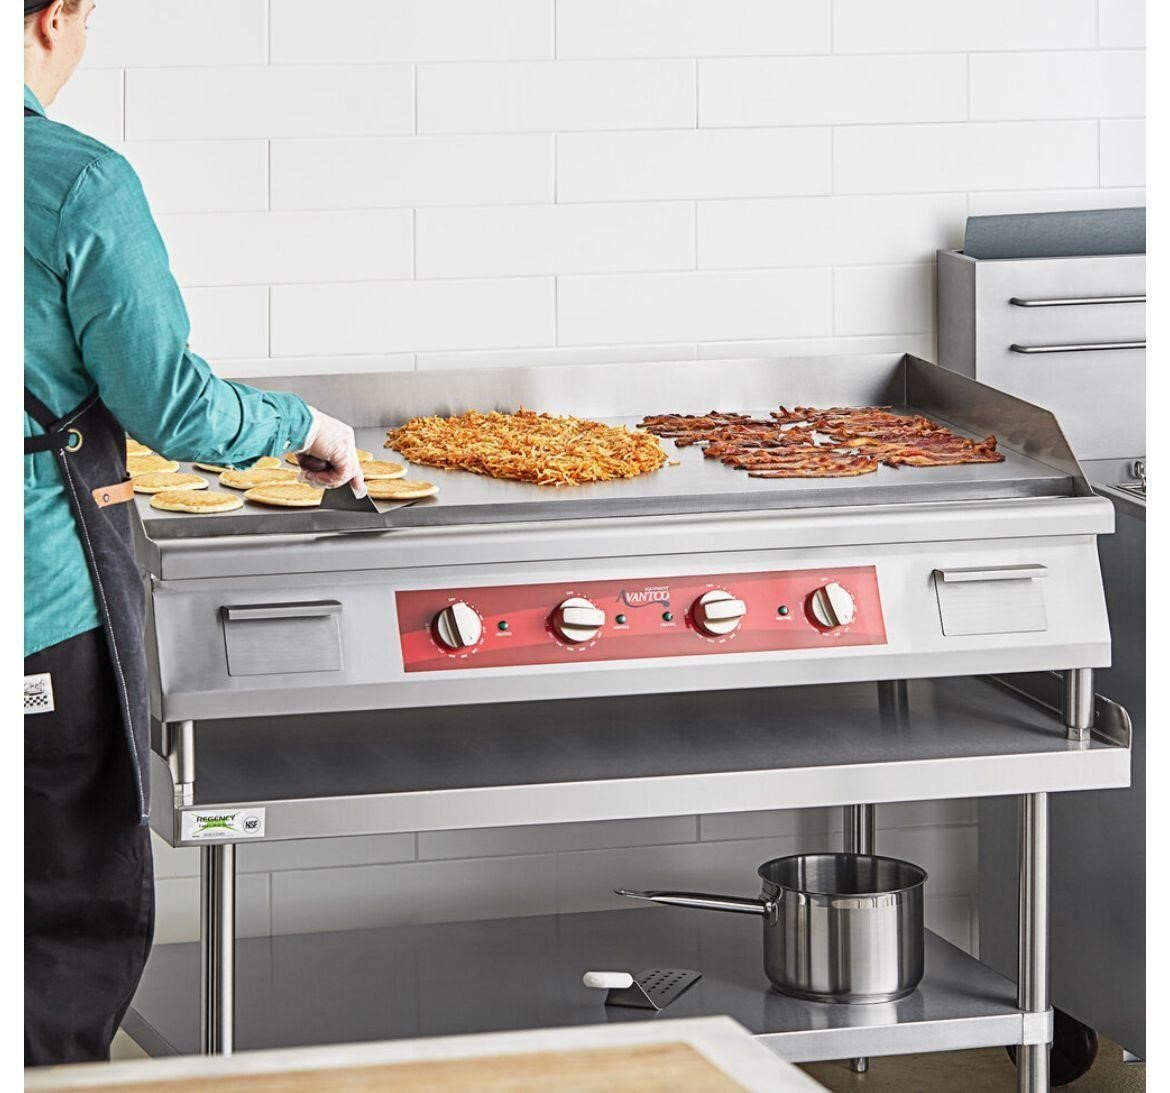 AVANTCO Electric Griddle - New in Packaging